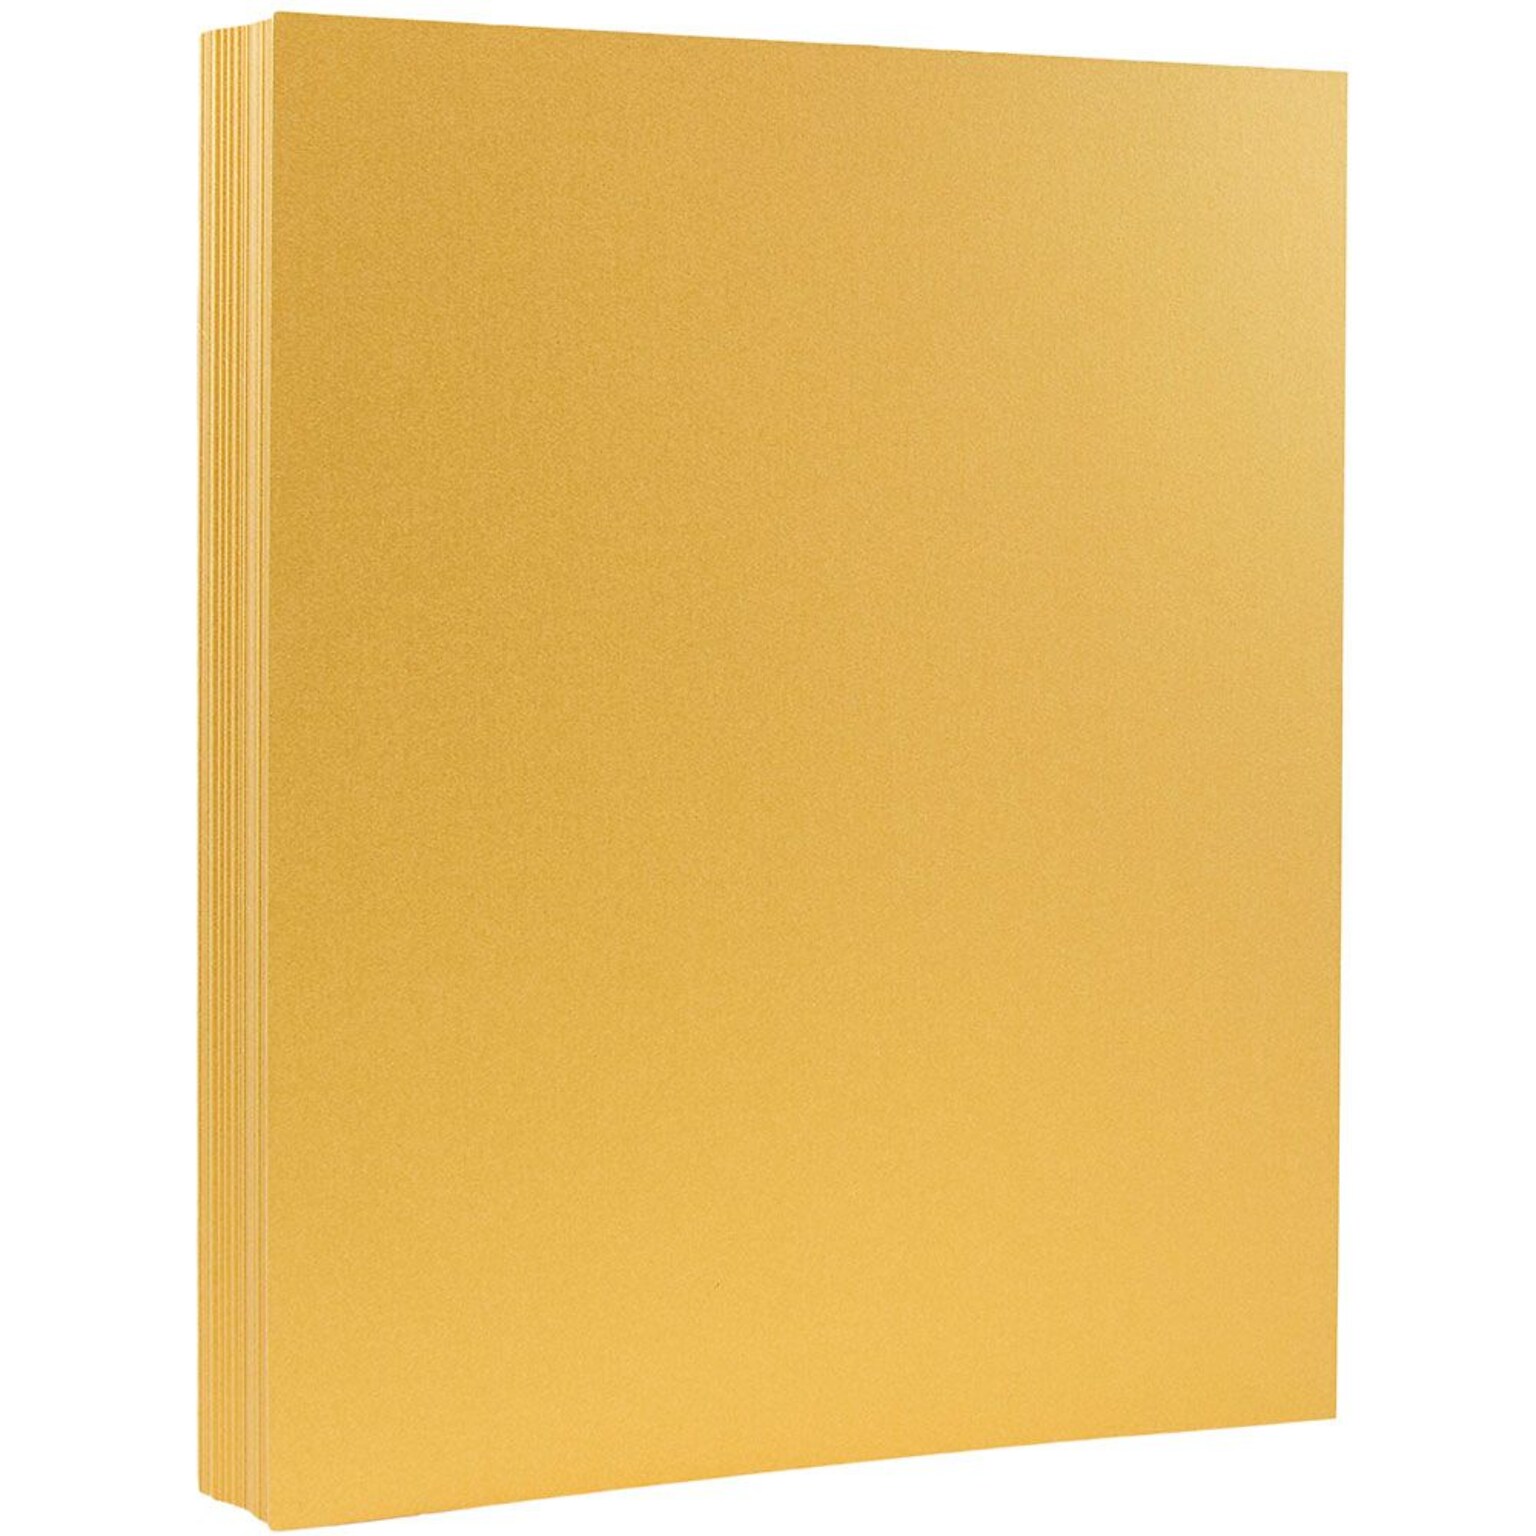 JAM Paper Metallic Colored 8.5 x 11 Copy Paper, 32 lbs., Gold Stardream, 25 Sheets/Pack (173SD8511GO120B)